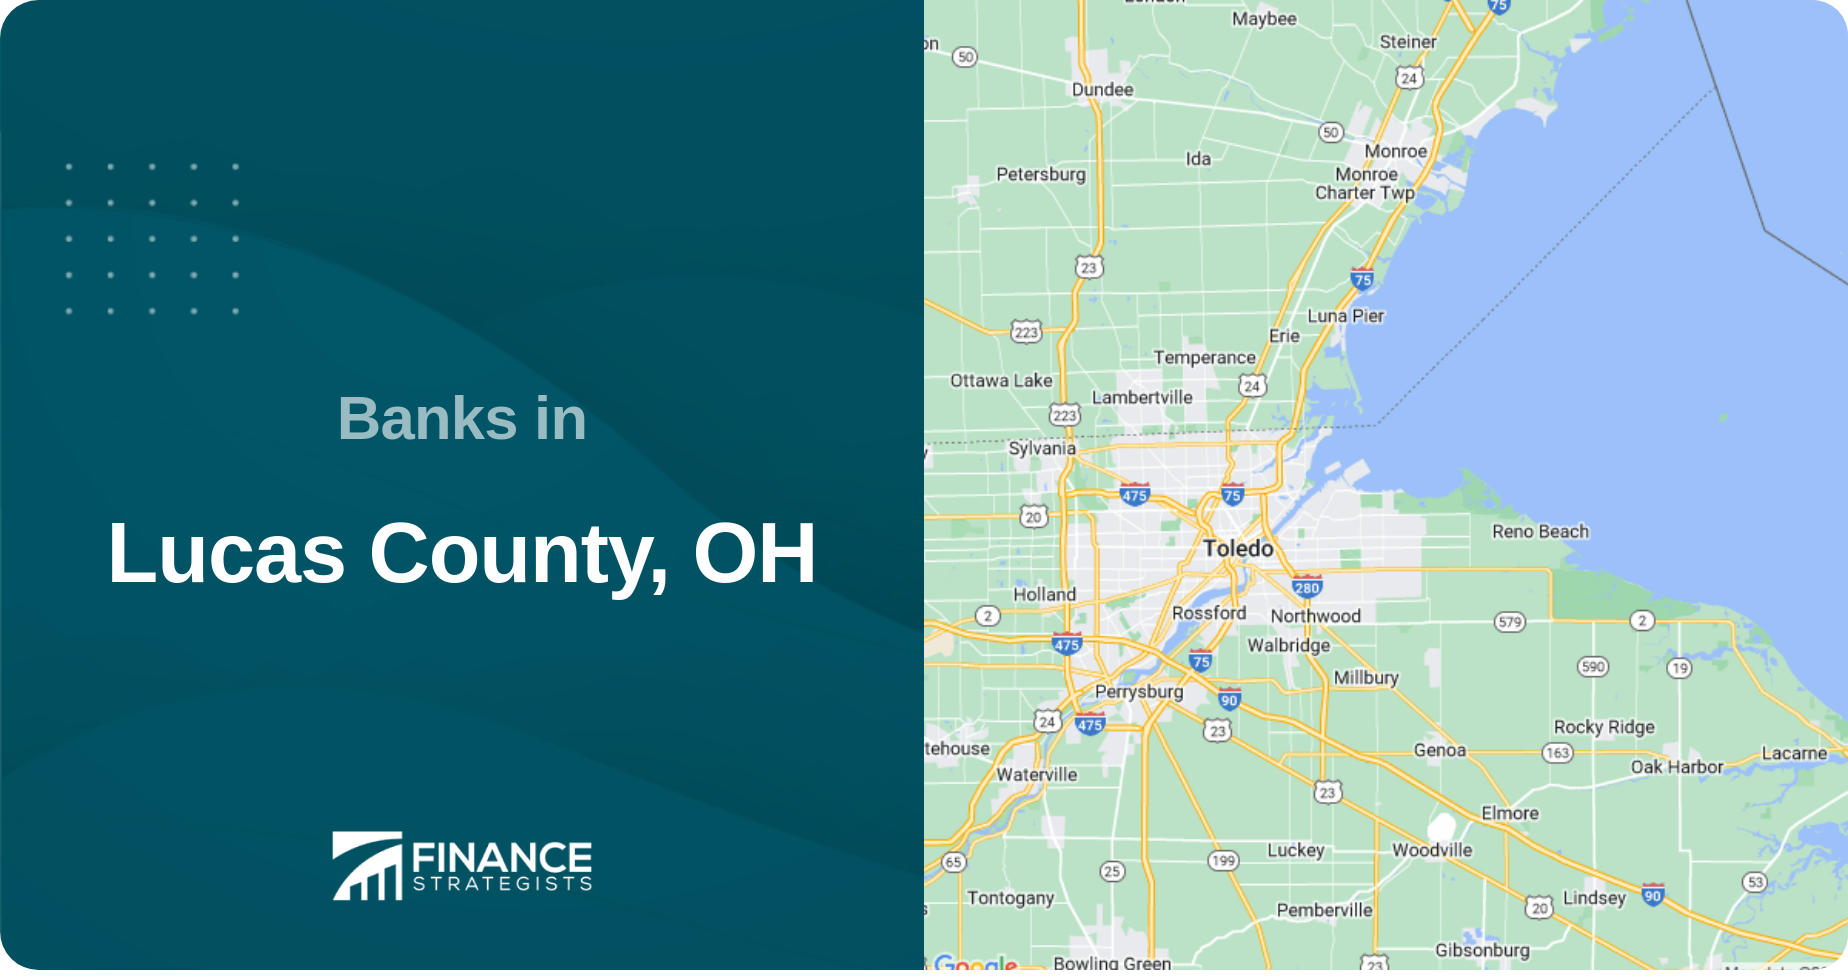 Banks in Lucas County, OH